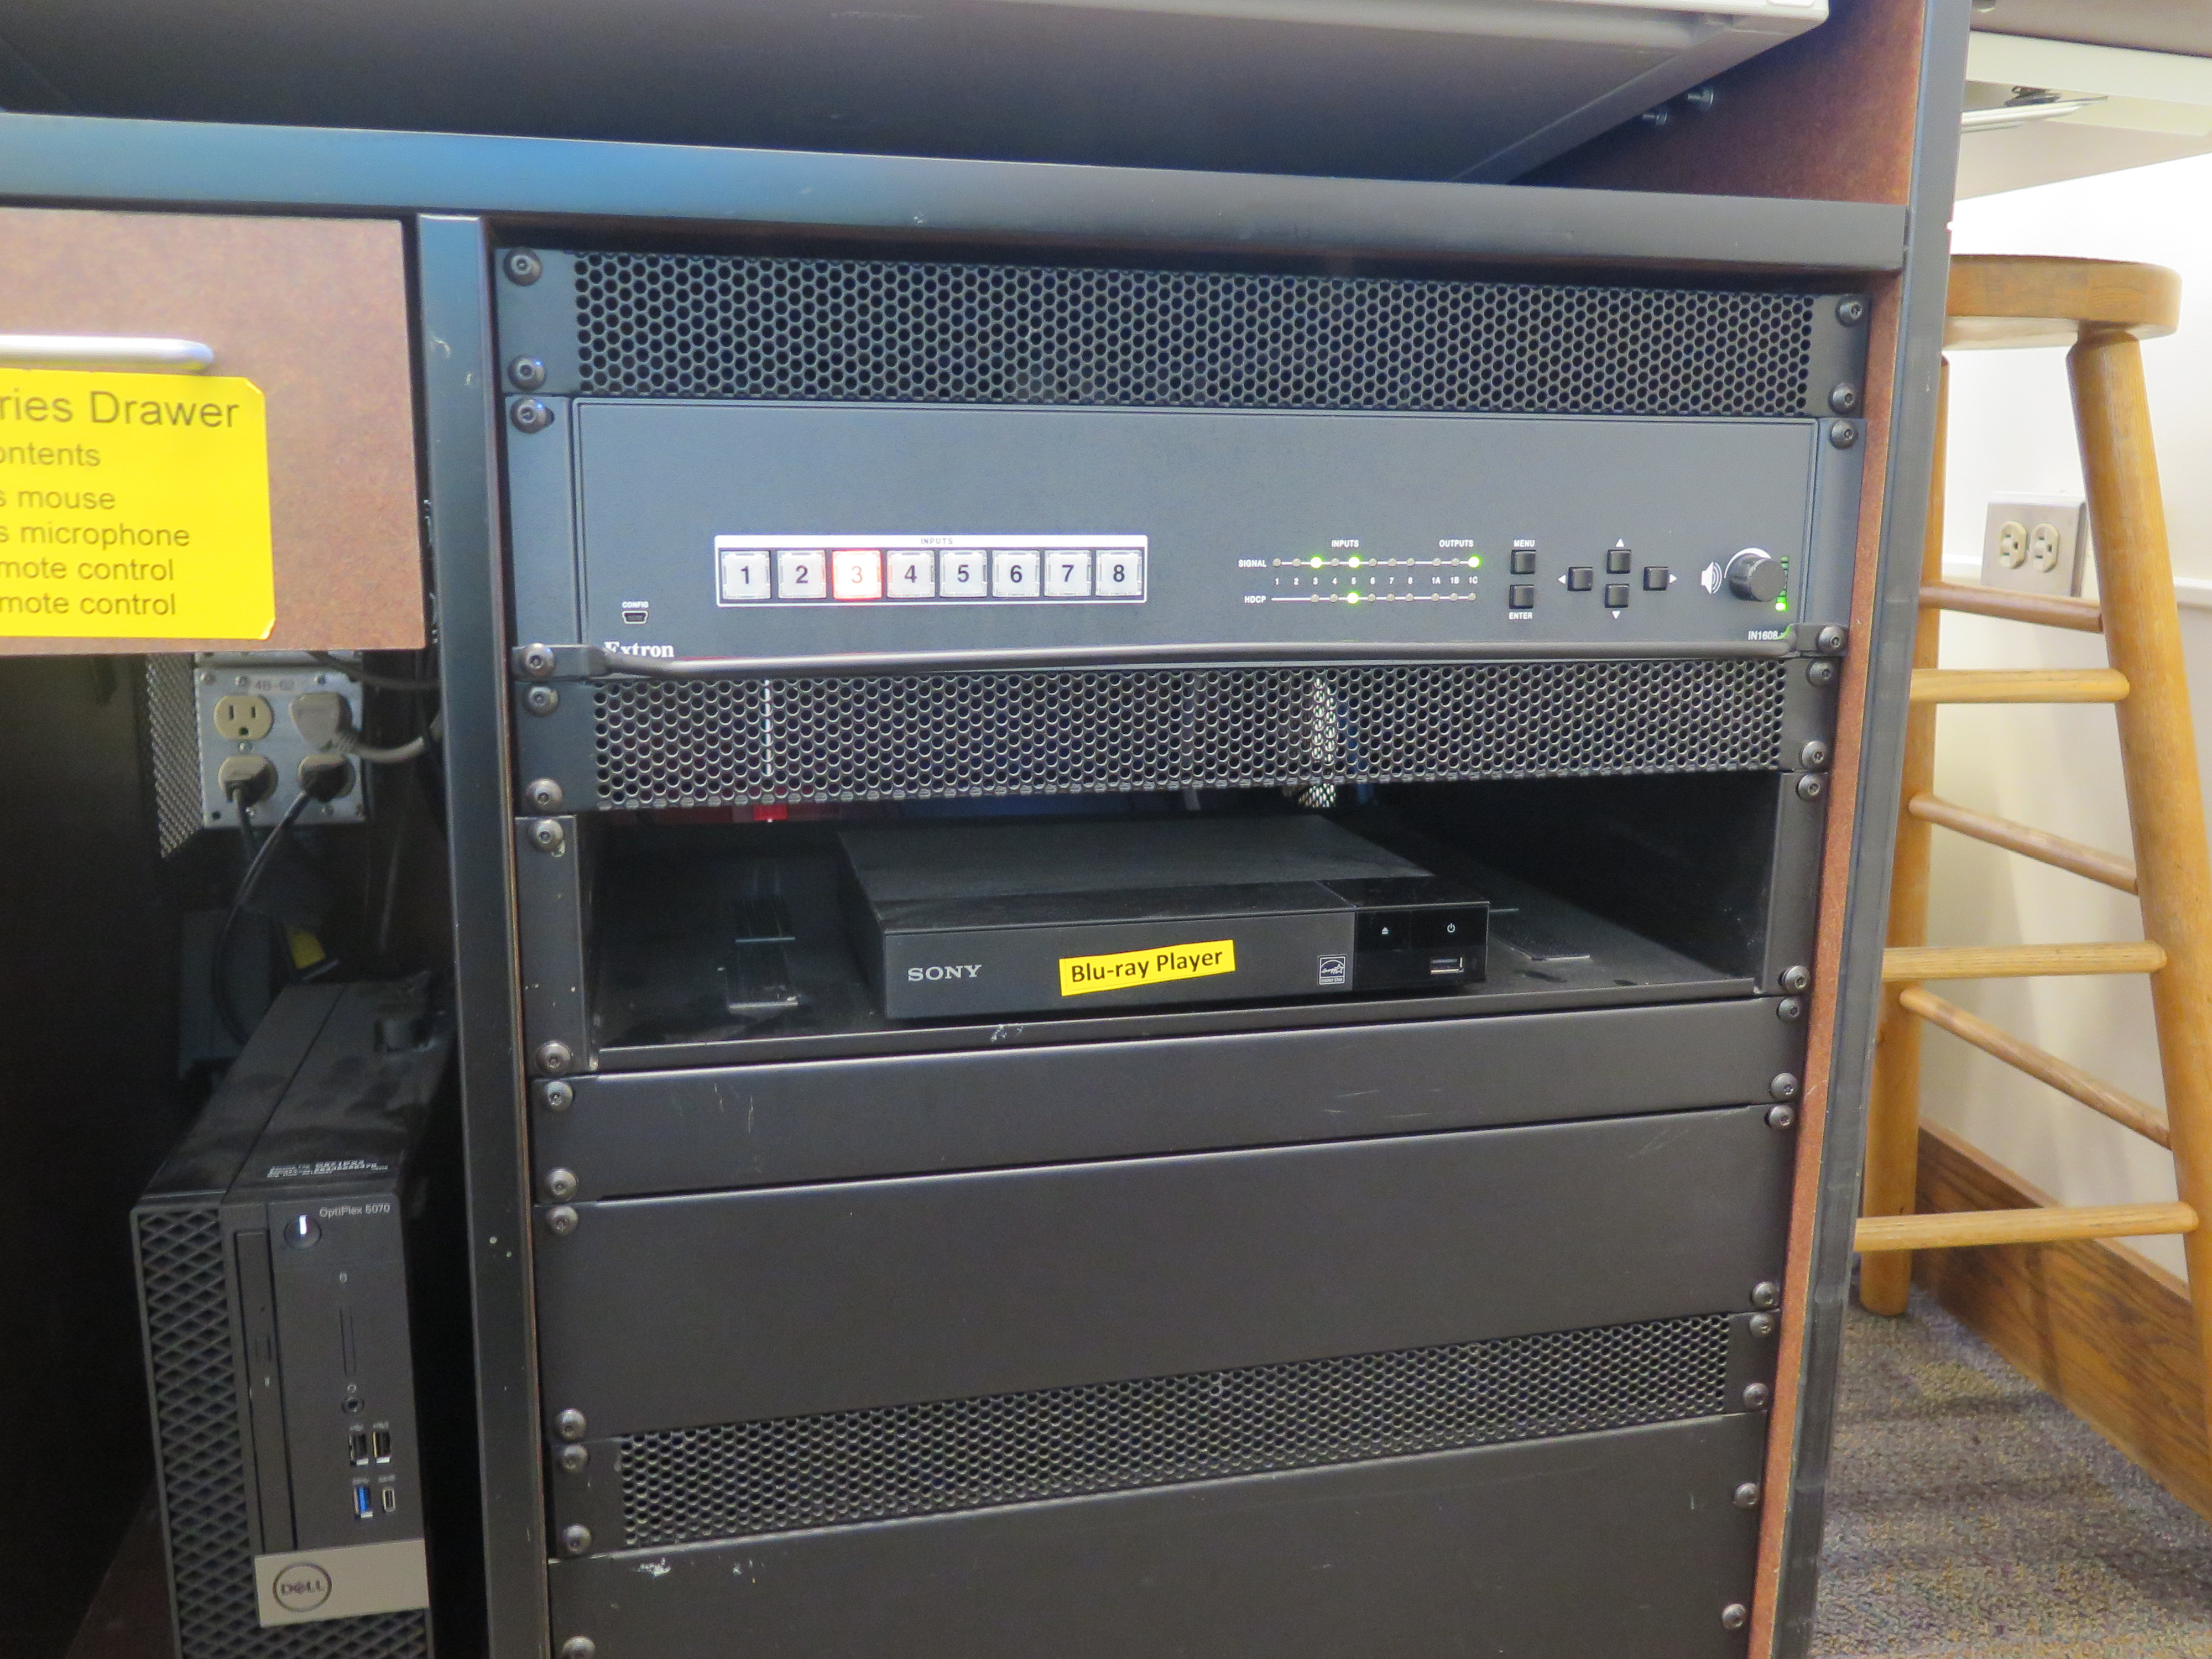 Display rack consists of a AV controller, Blu-Ray/DVD player and Dell Computer